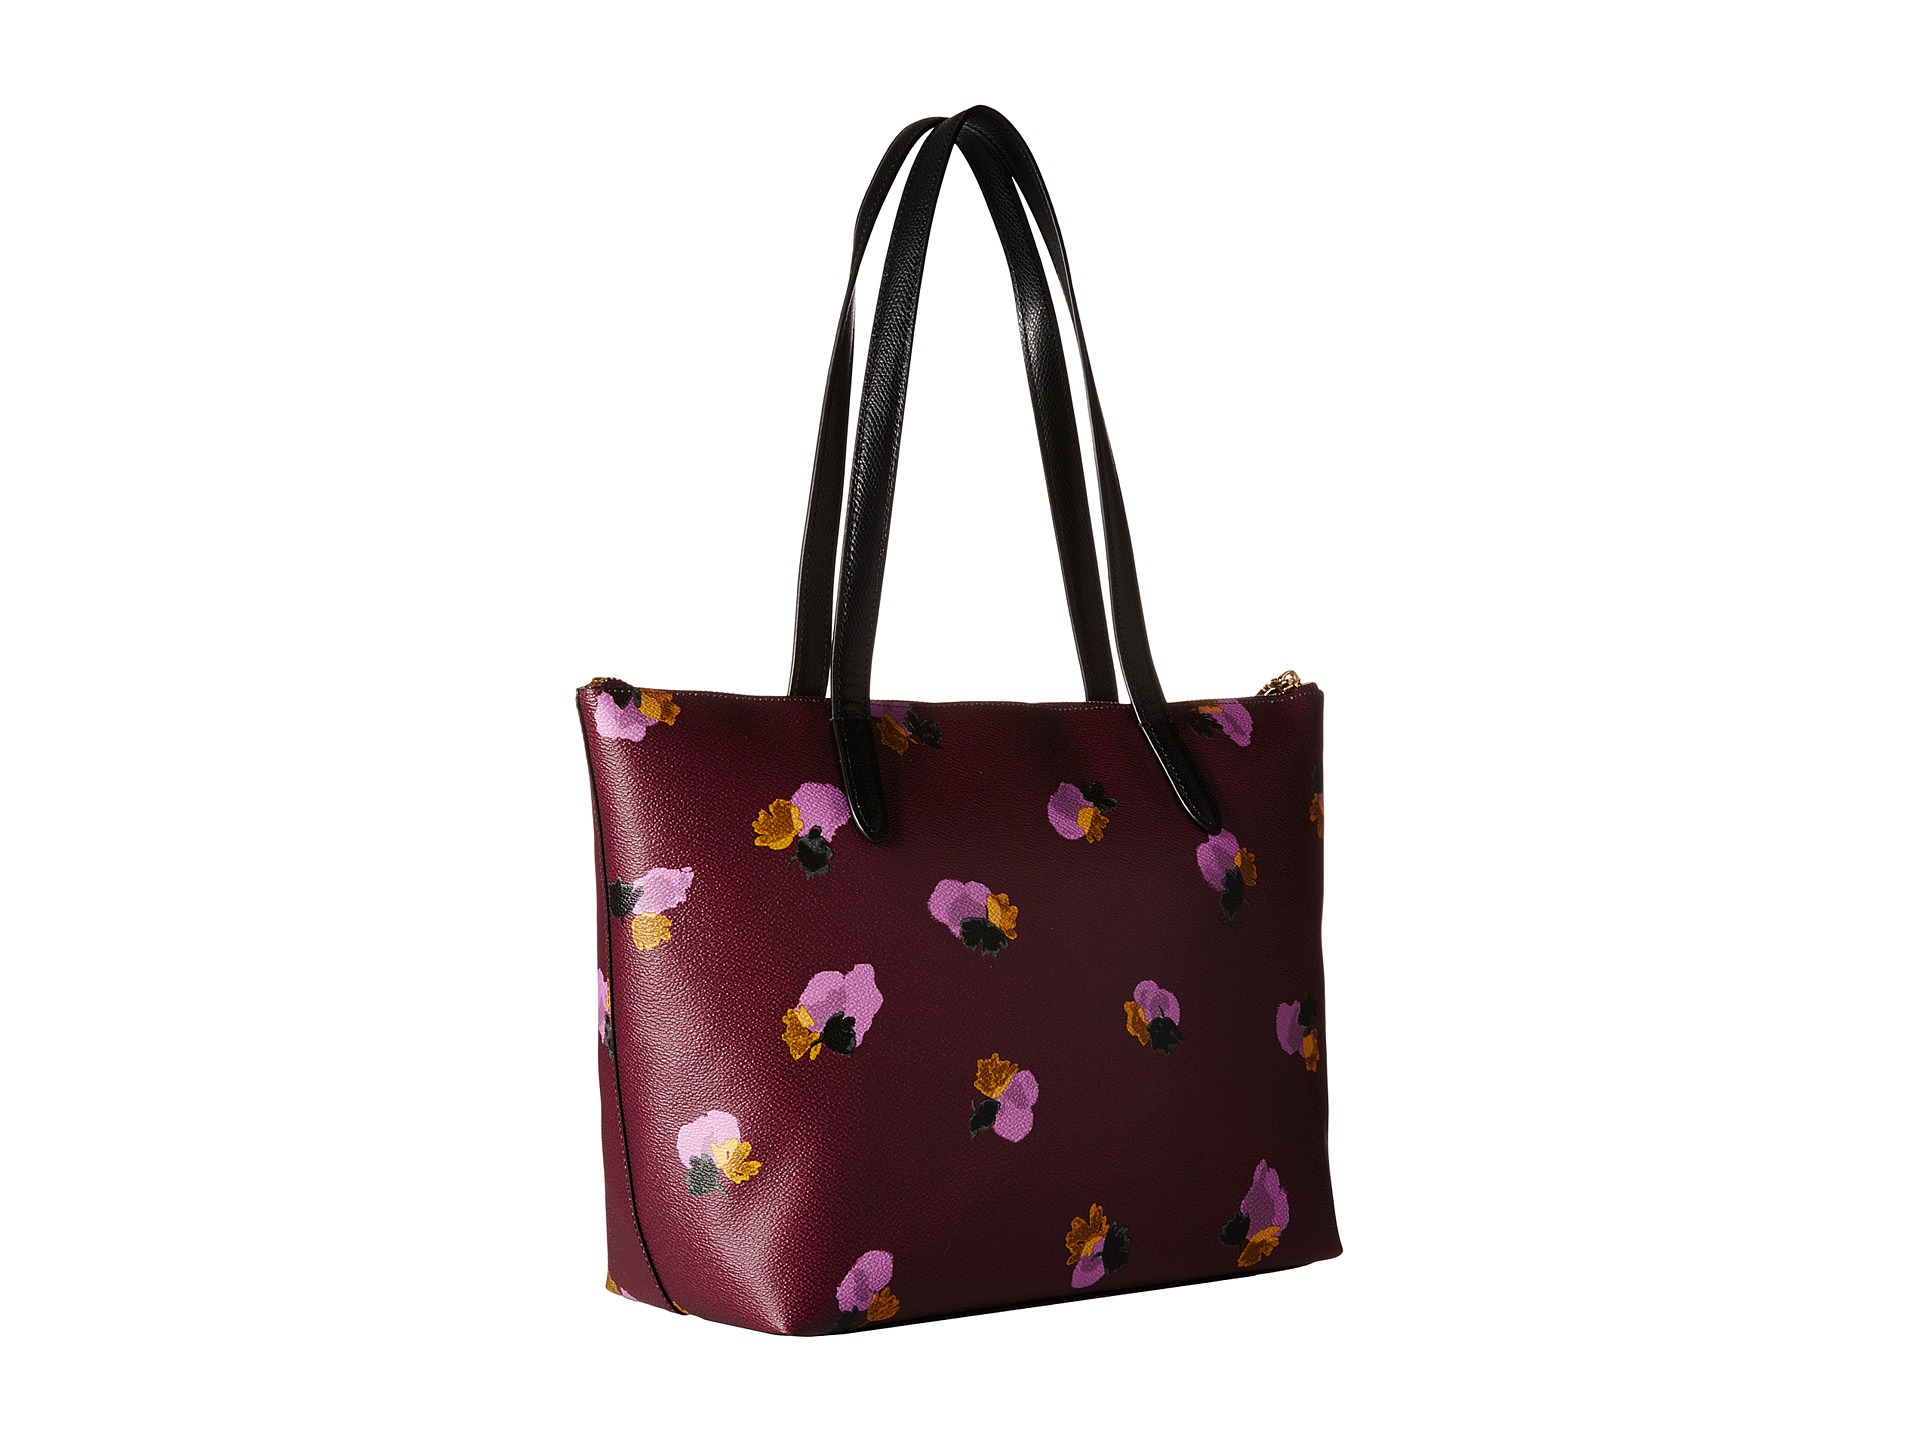 Lyst - Coach Whls Floral Printed Taylor Tote in Purple